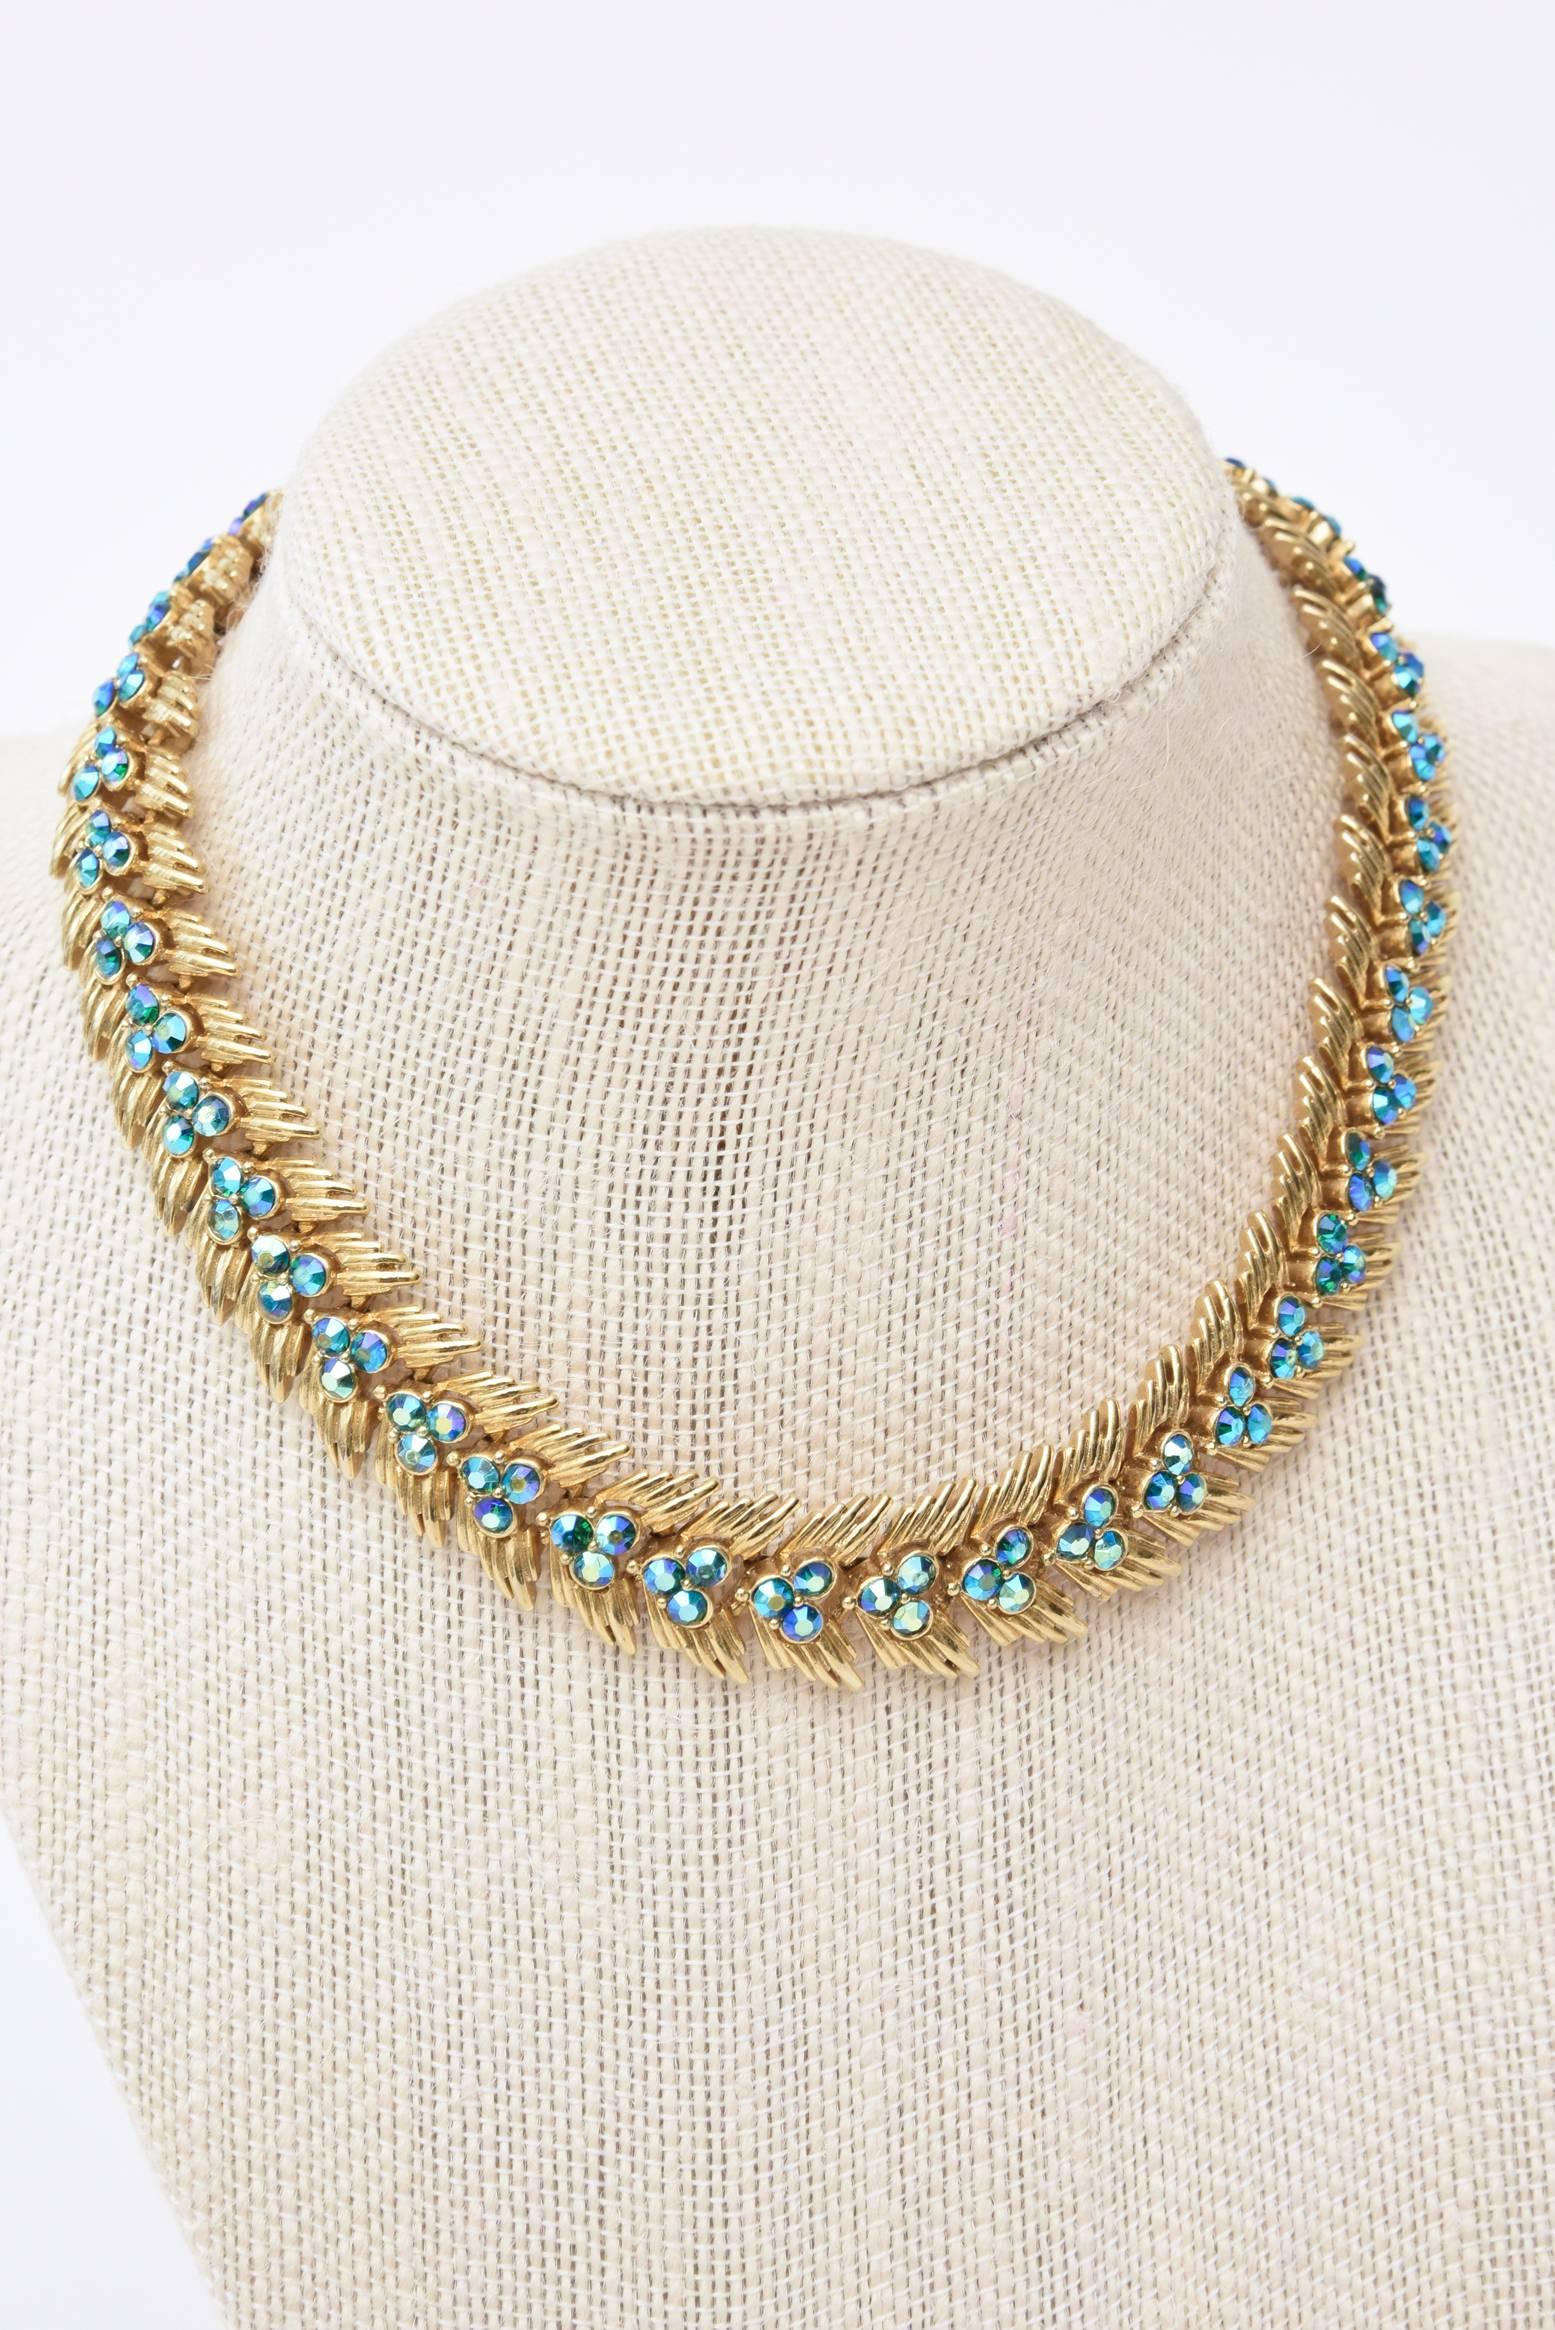  Trifari Vintage Sapphire Turquoise Blue Choker Necklace and Clip on Earring Set For Sale 2